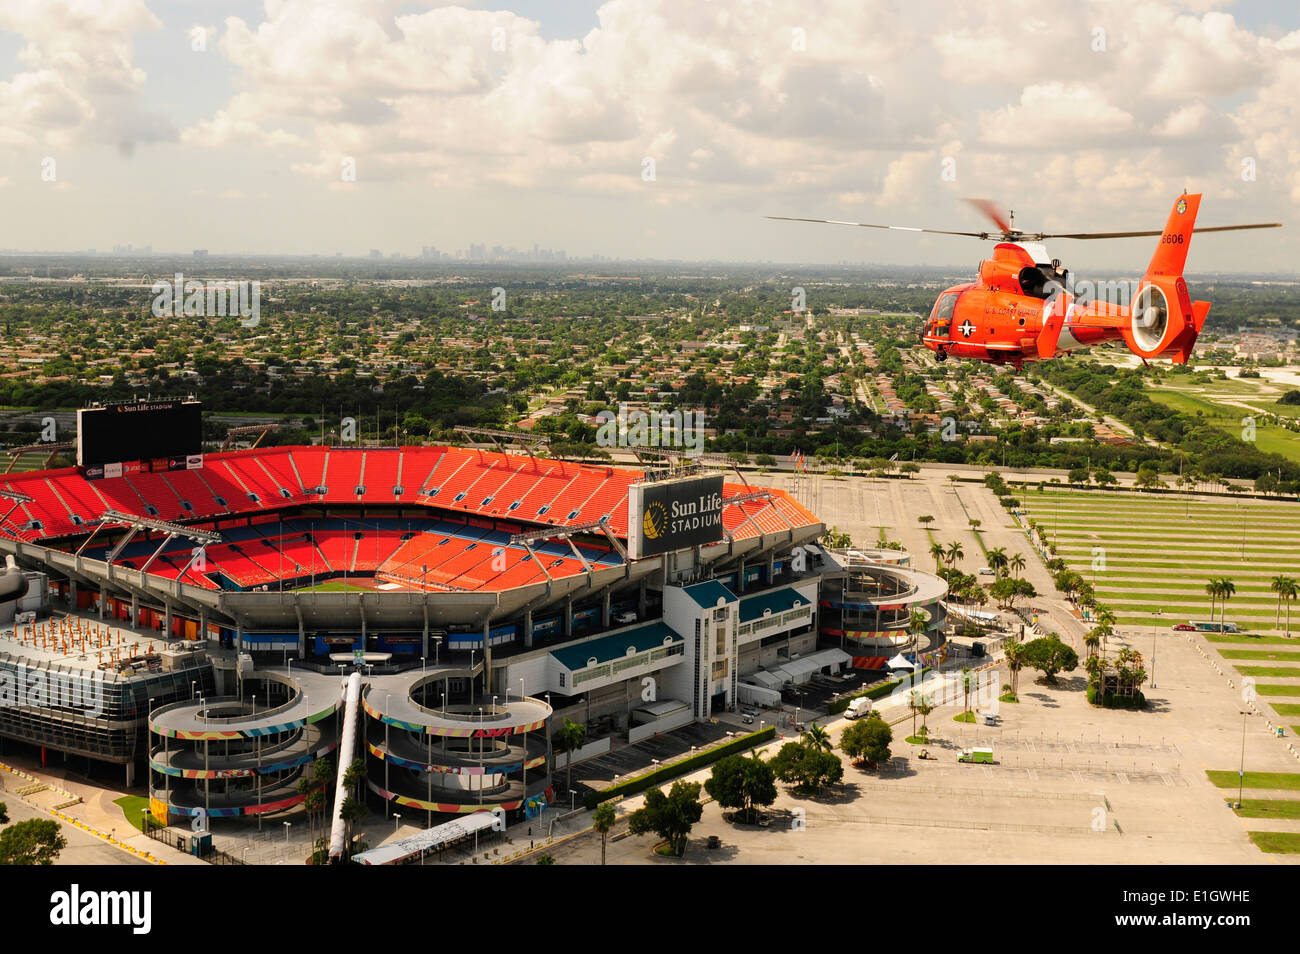 MIAMI - A Coast Guard Air Station Miami MH-65 Dolphin helicopter crew conducts a practice fly over of Sun Life Stadium Aug. 3, Stock Photo